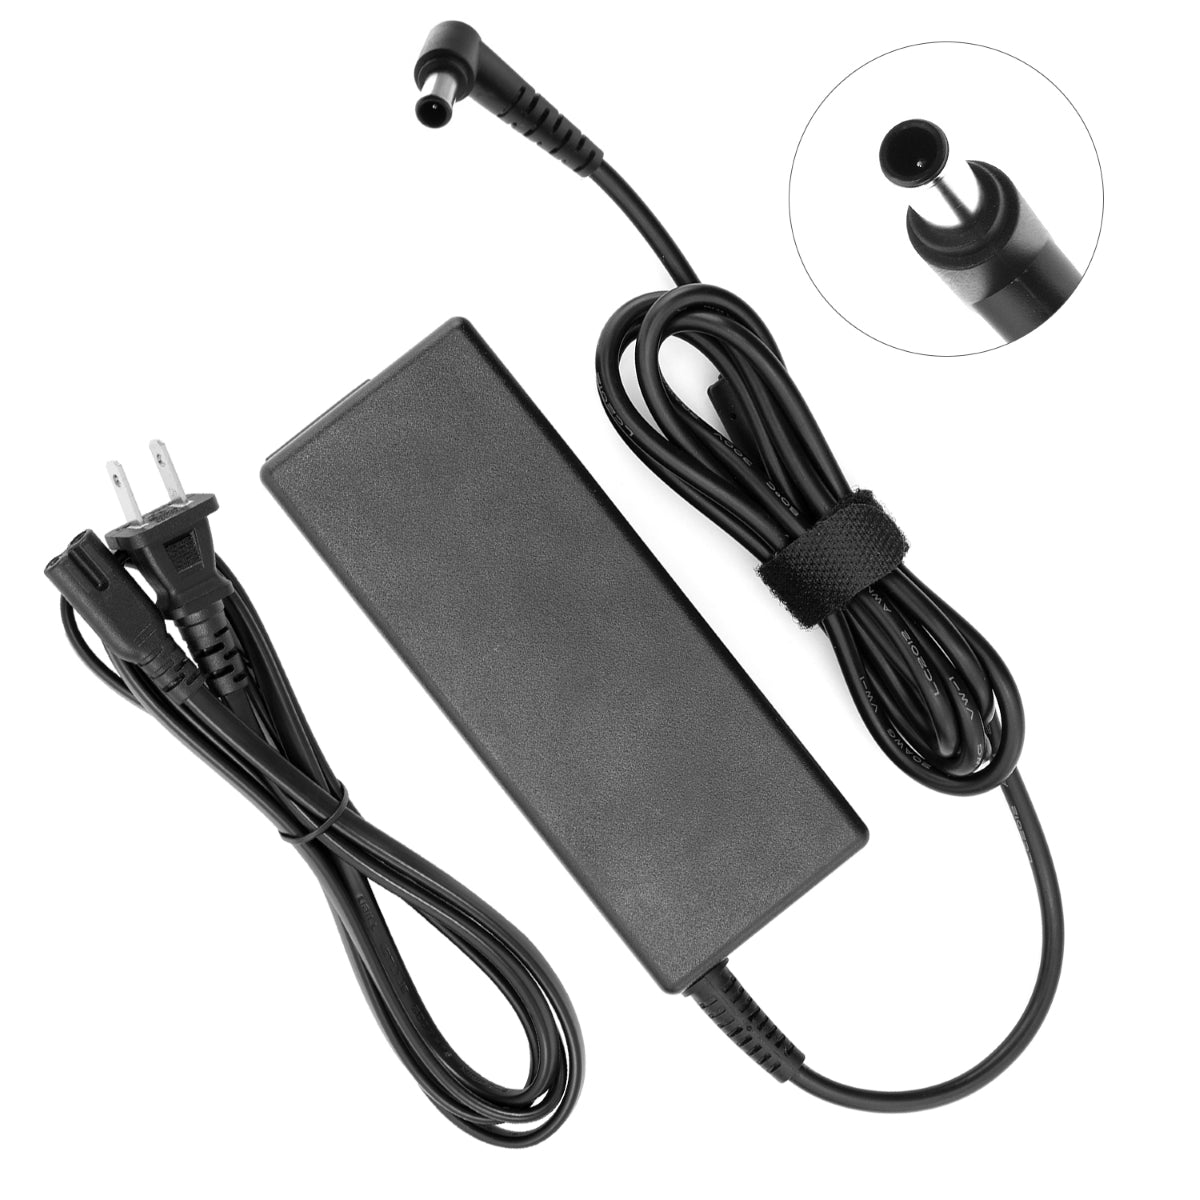 Power Adapter for Samsung LC32T550FDNXZA Monitor TV